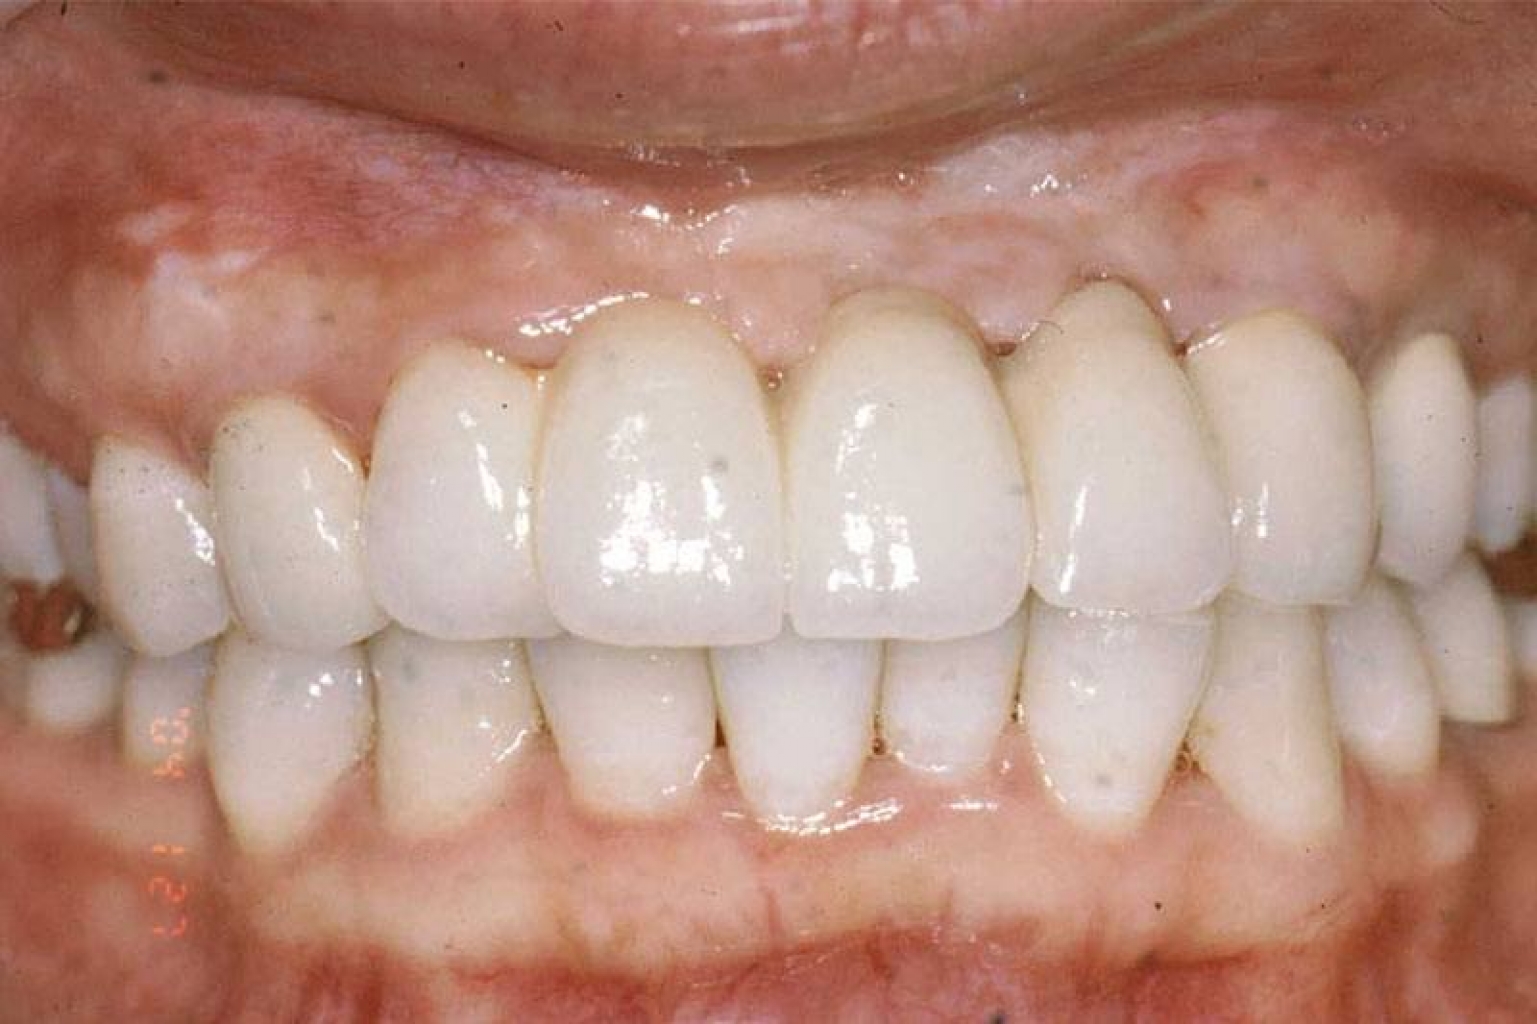 This patient’s upper seven teeth were restored using four implants and an implant-supported bridge.